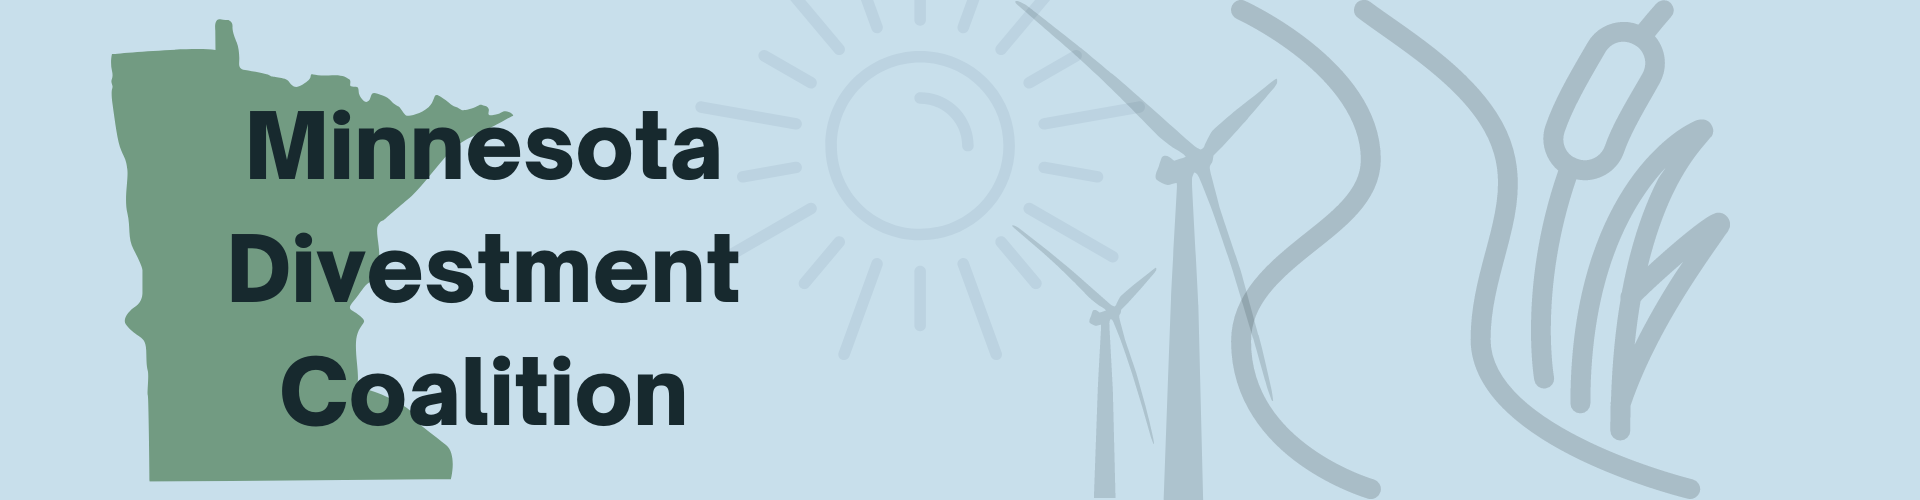 Light blue background with green shape of the state of Minnesota. Sketch art of a beaming sun, windmills, and riverbed. Text reads "Minnesota Divestment Coalition"